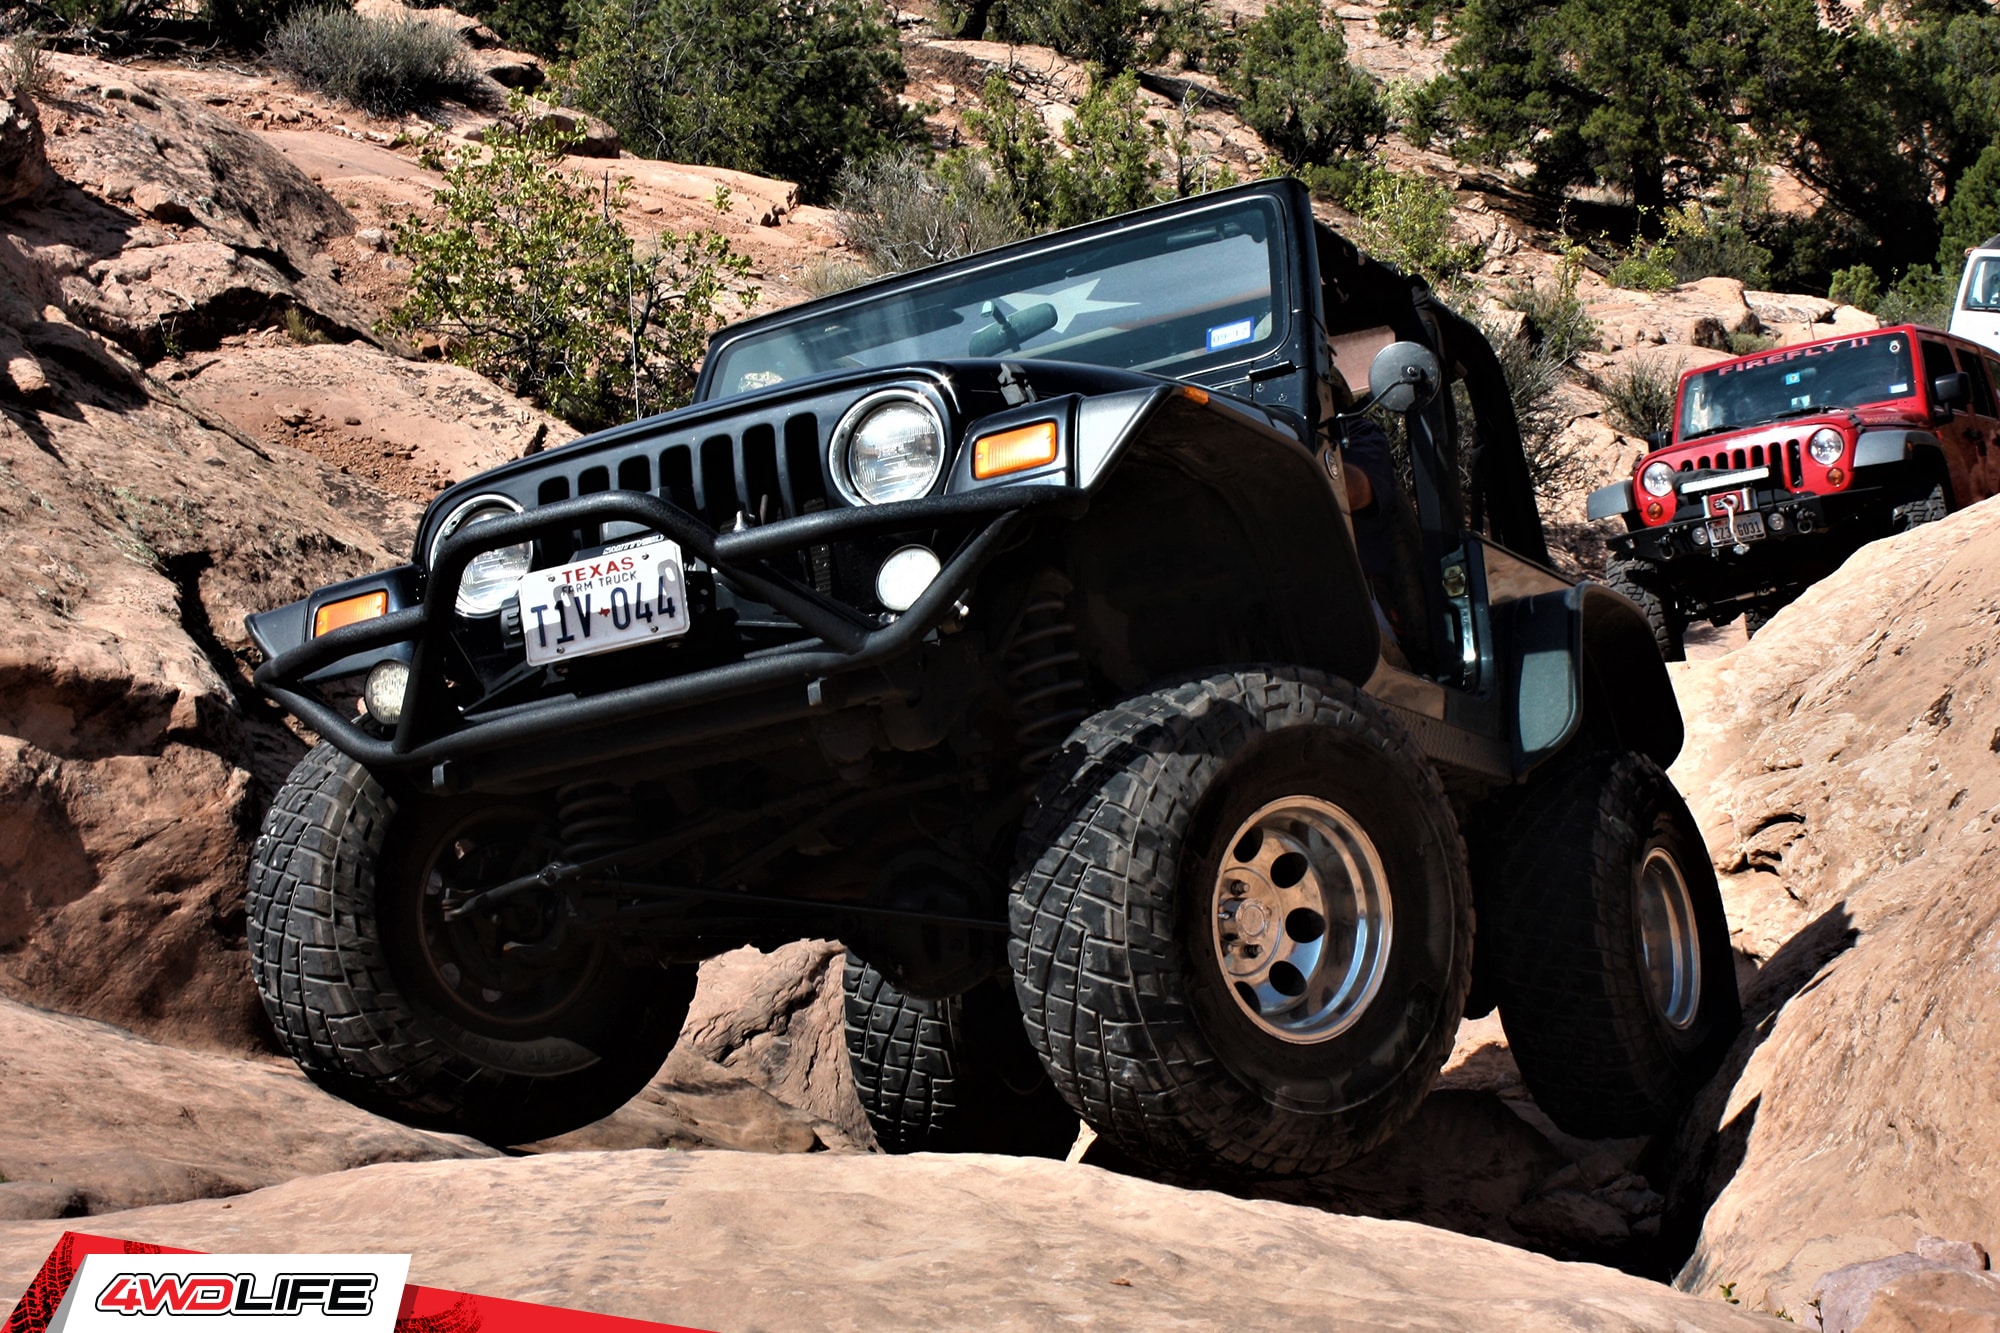 The Best 35” Tires for Jeep Wrangler - Plus, Buying Guide